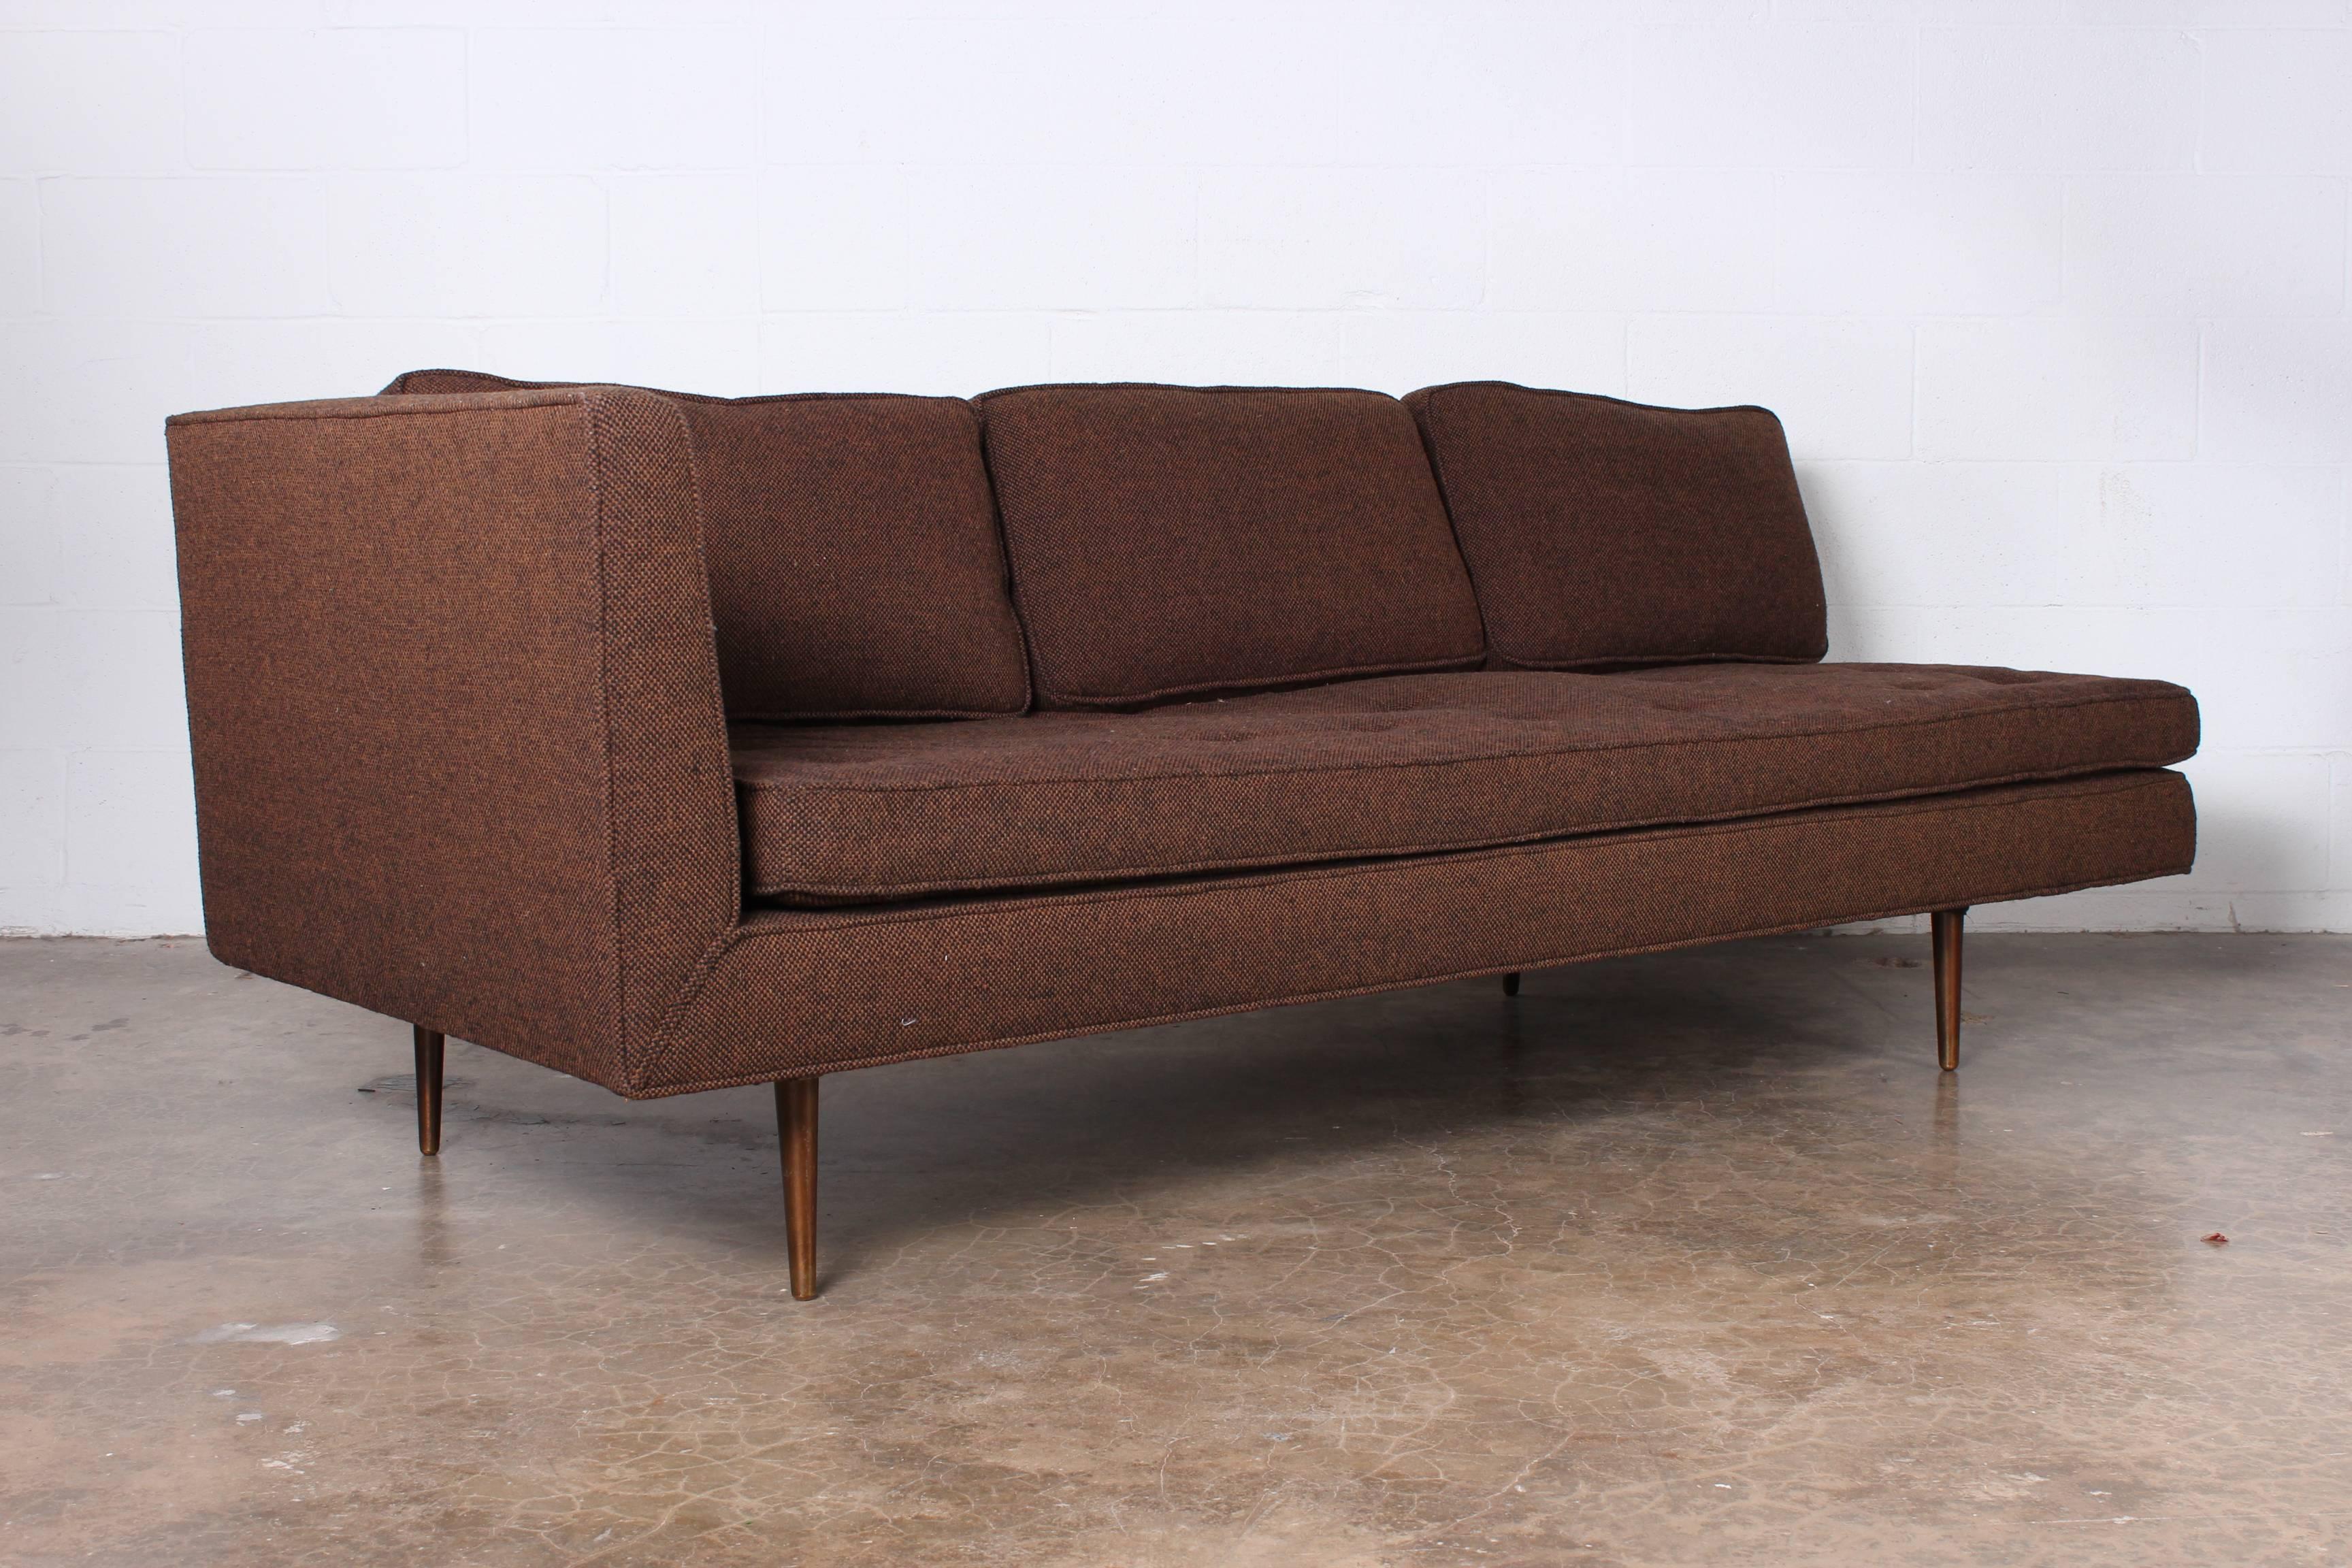 A one armed sofa or chaise with brass legs. Designed by Edward Wormley for Dunbar.